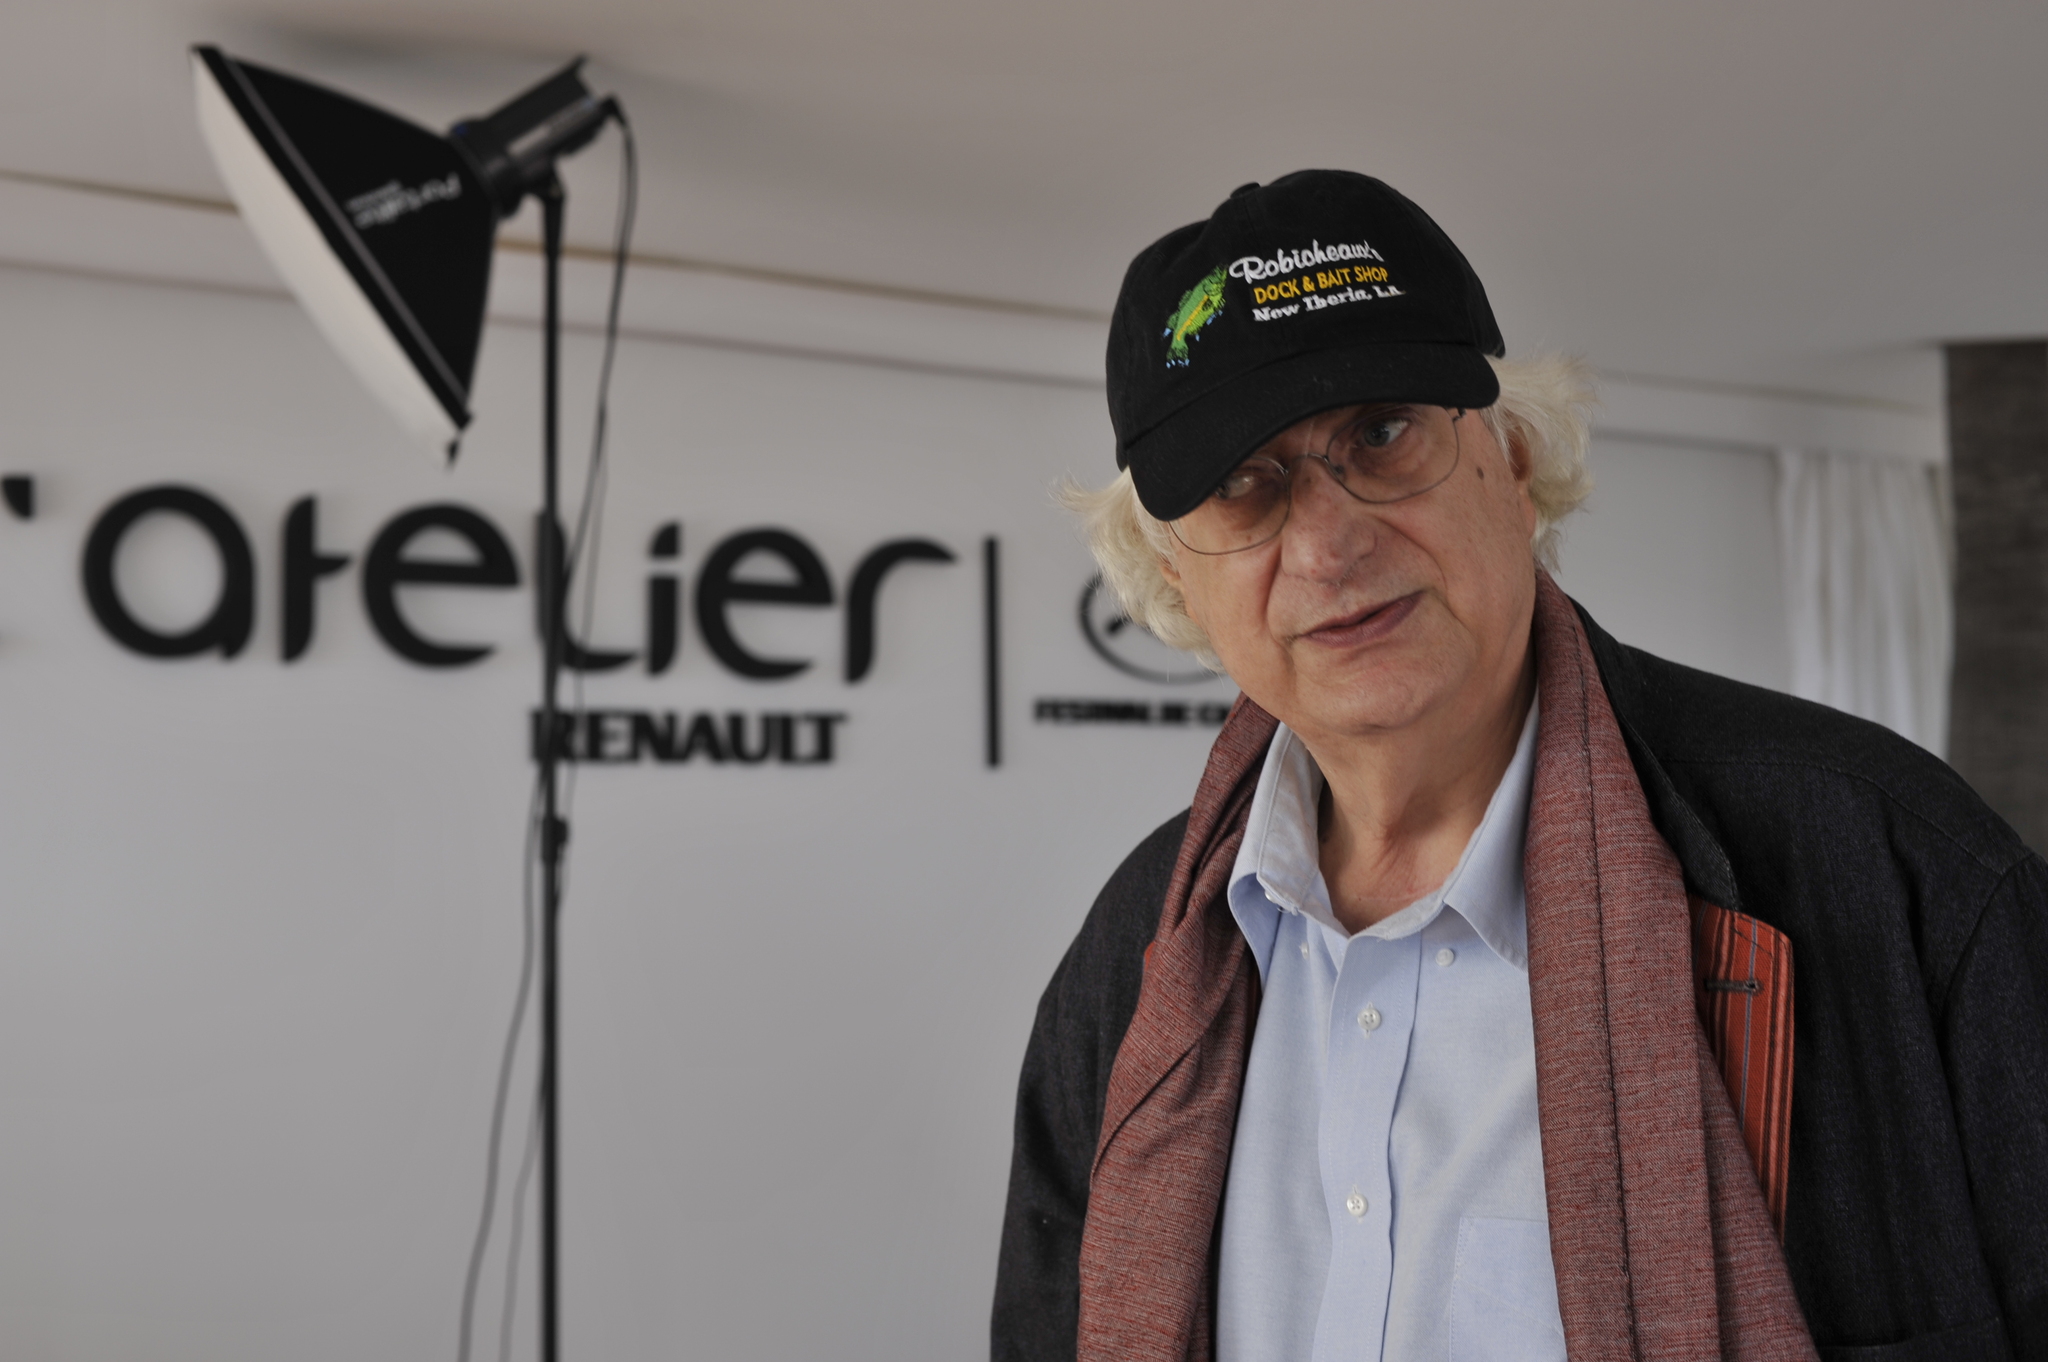 CANNES, FRANCE - MAY 17: Atelier Renault